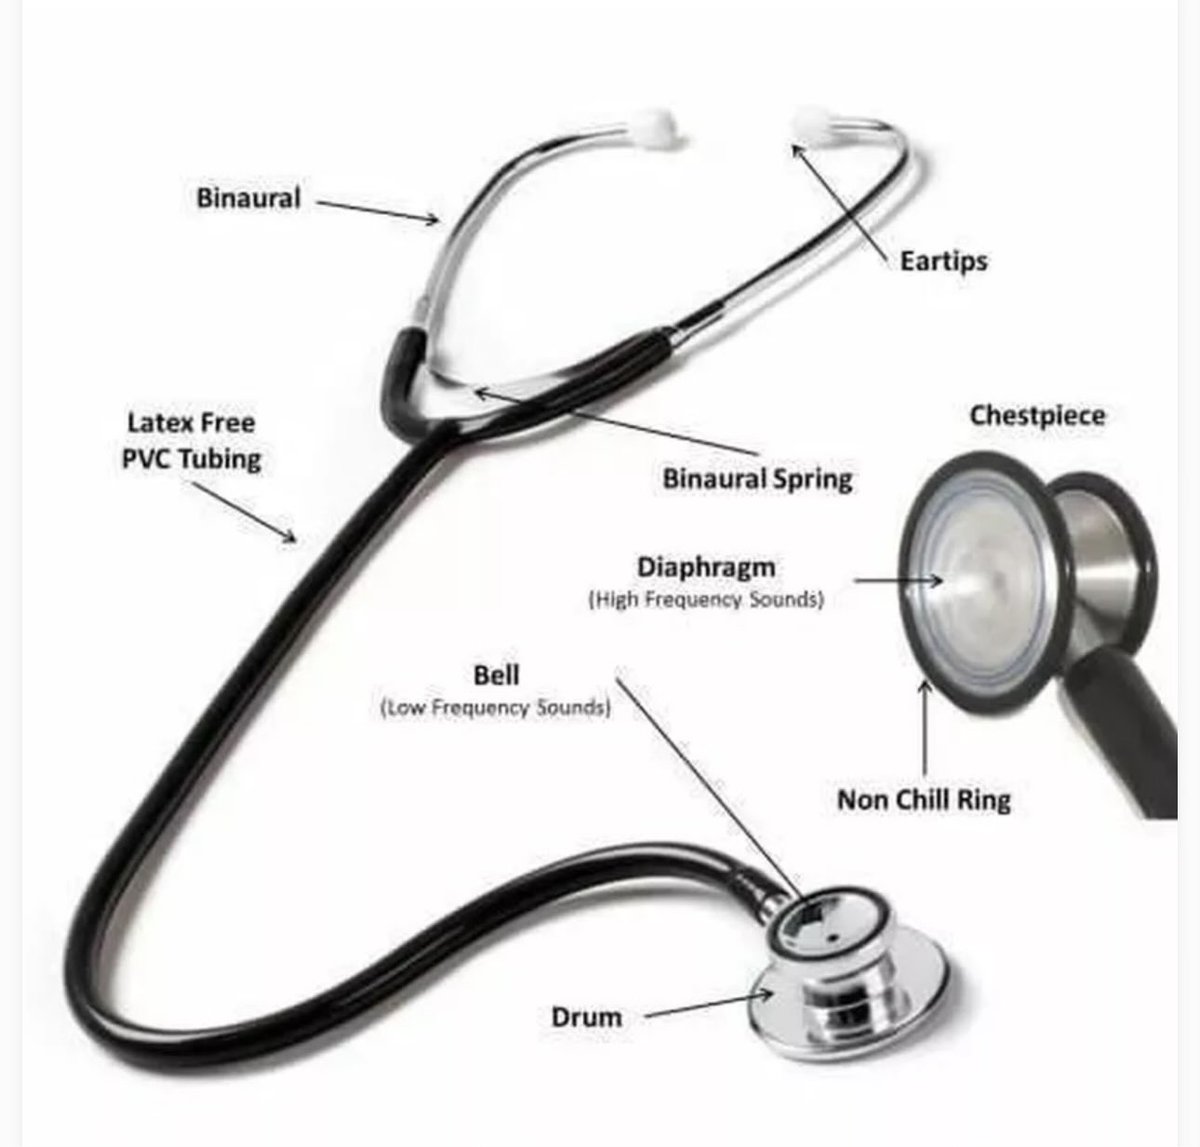 Anatomy of stethoscope. Do you use one of these?